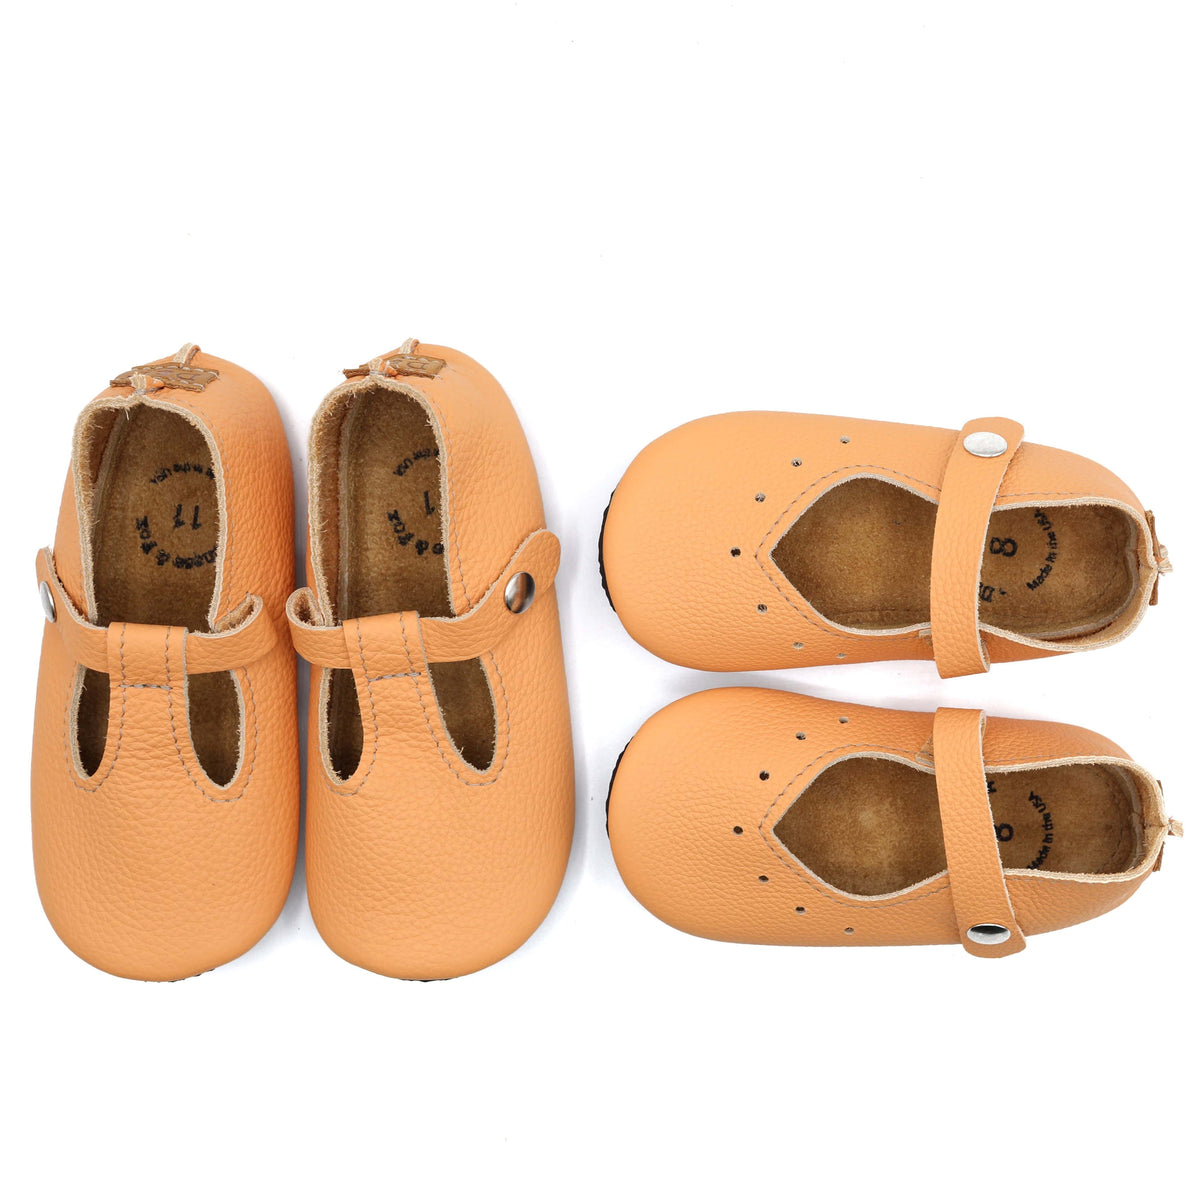 Duchess and Fox Children's Apricot Mary Janes & T-Straps handmade barefoot shoes